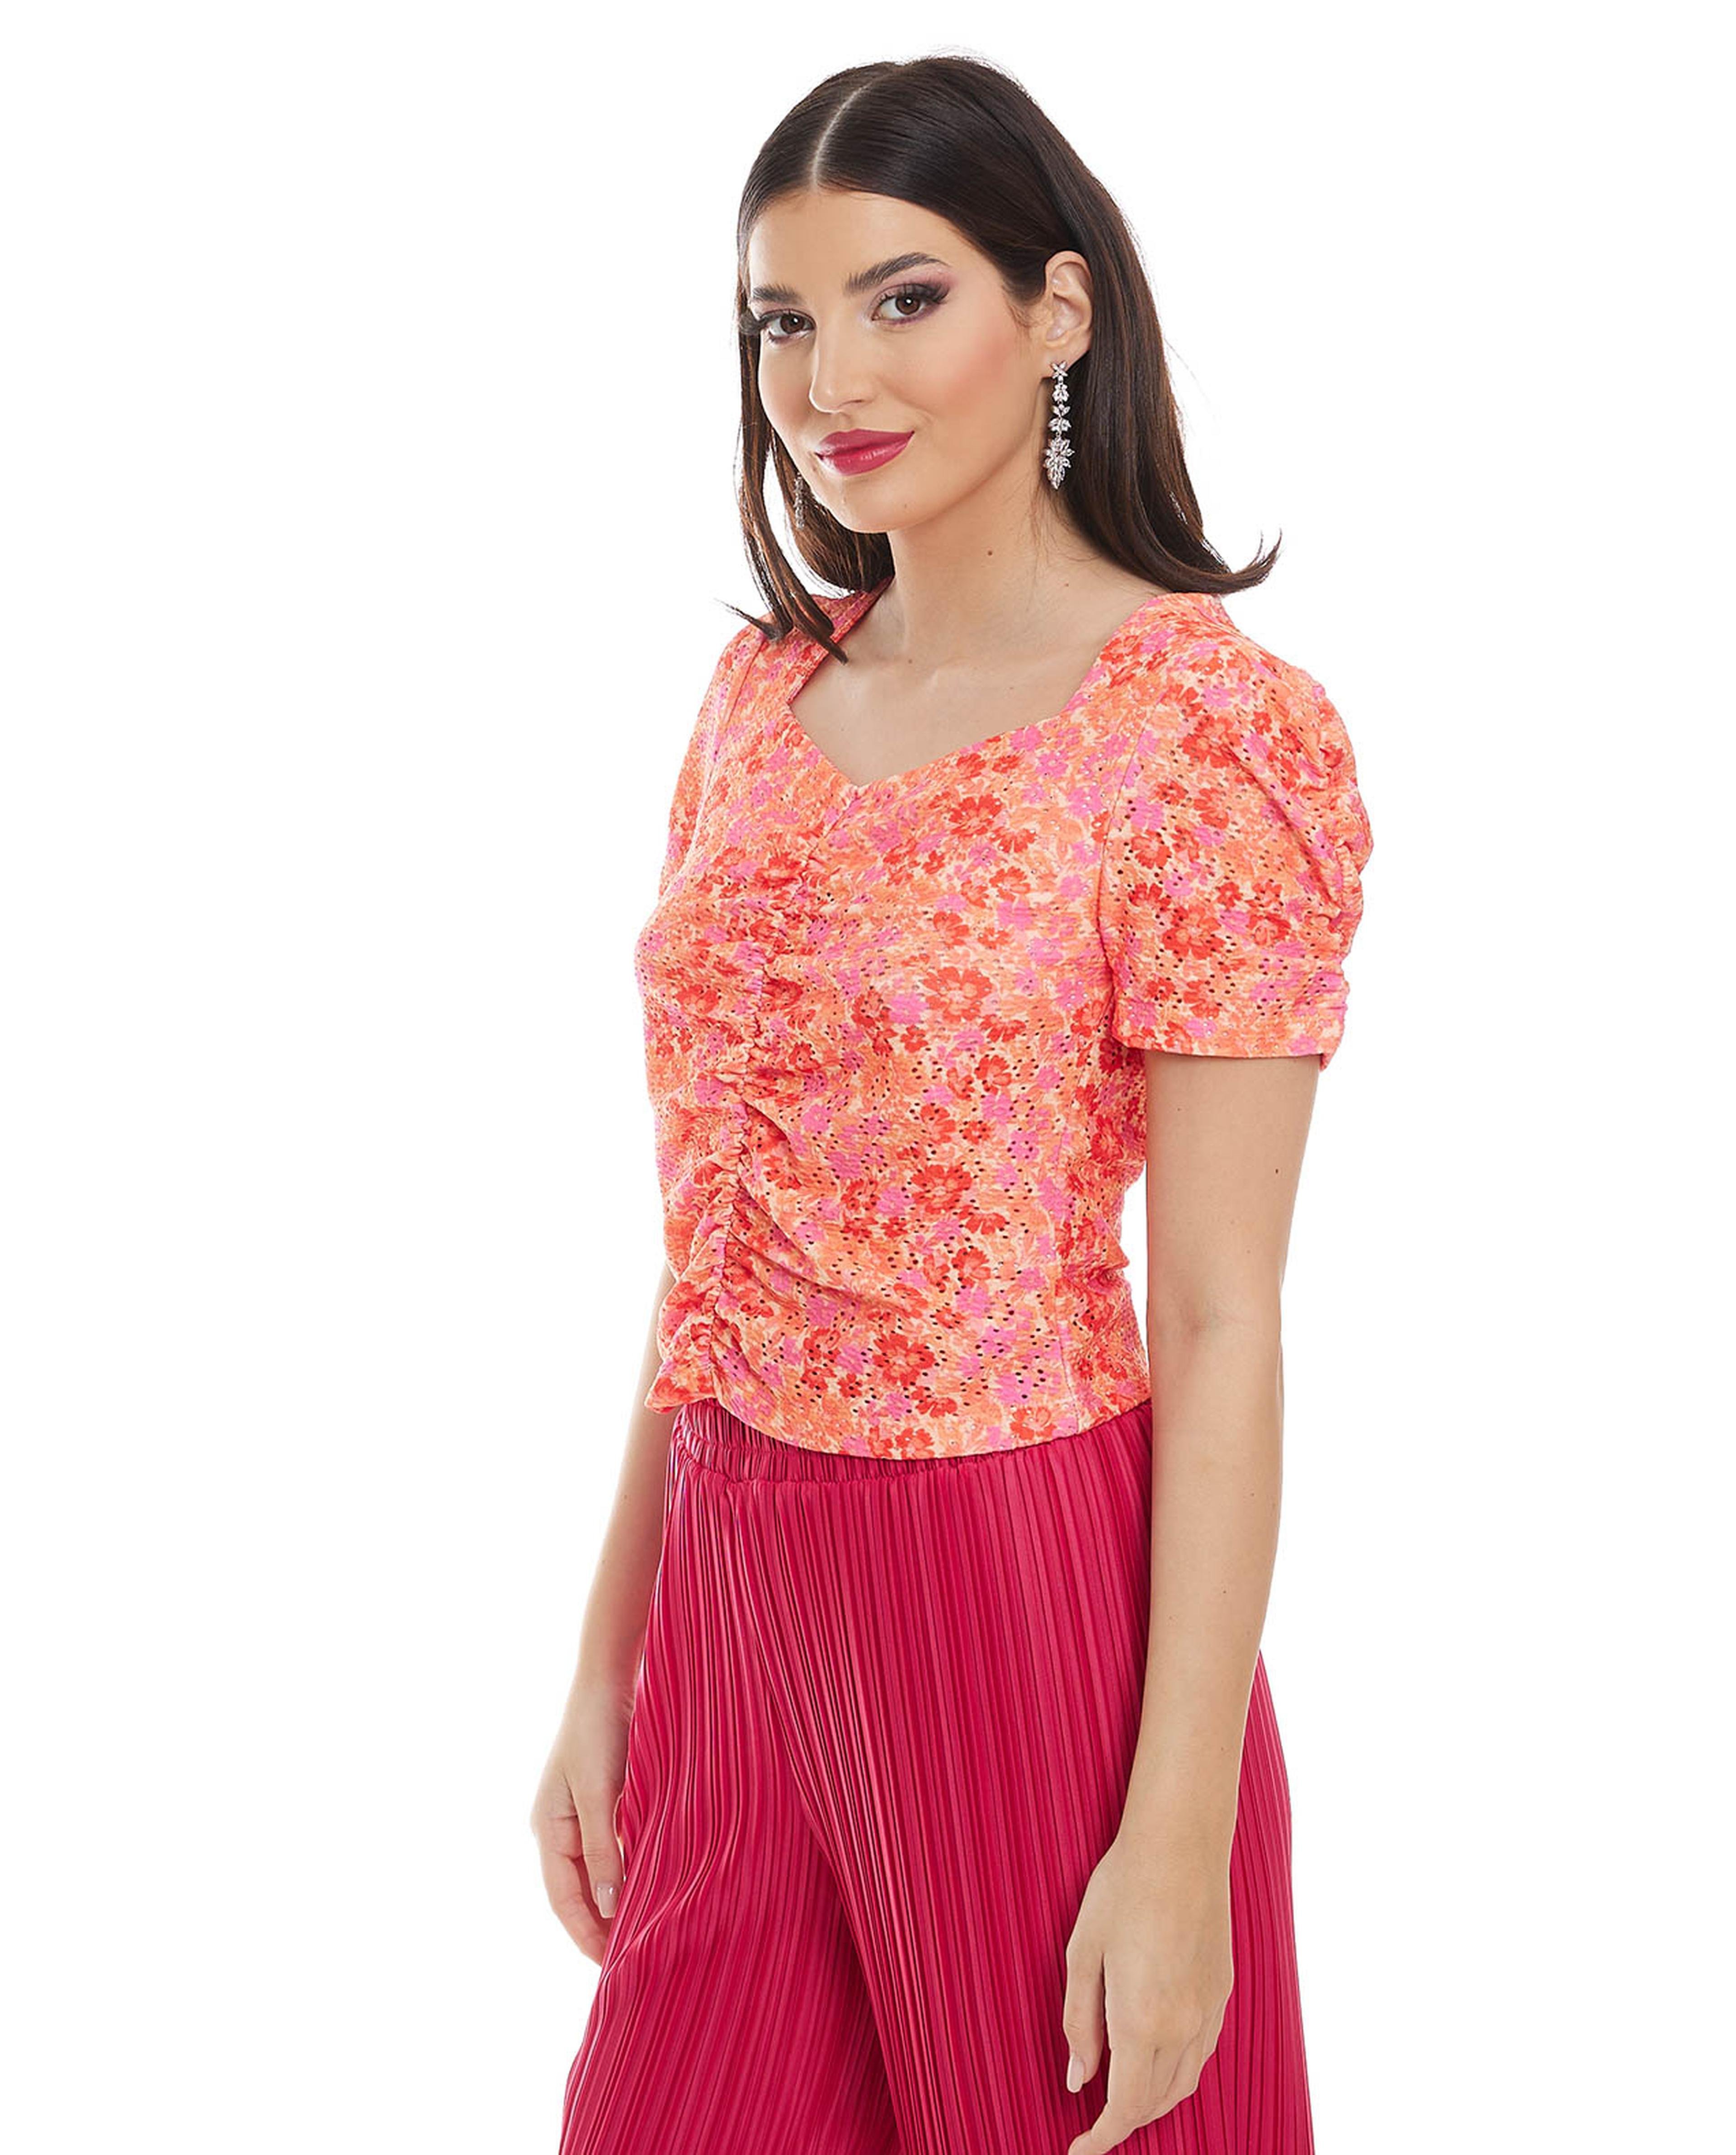 Printed Top with Sweetheart Neck and Short Sleeves